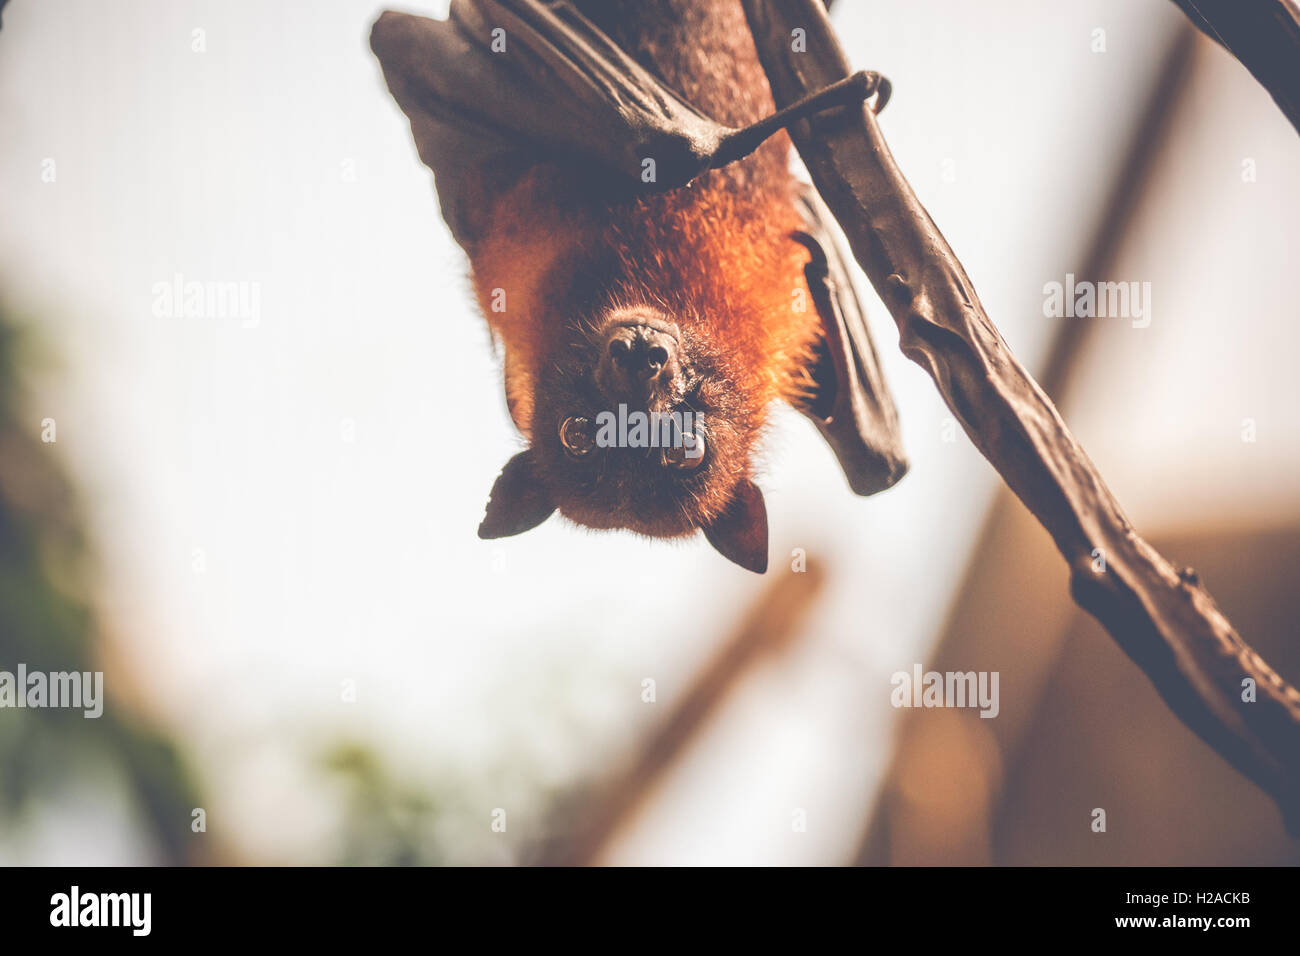 Bat hanging upside down and looking surprised Stock Photo